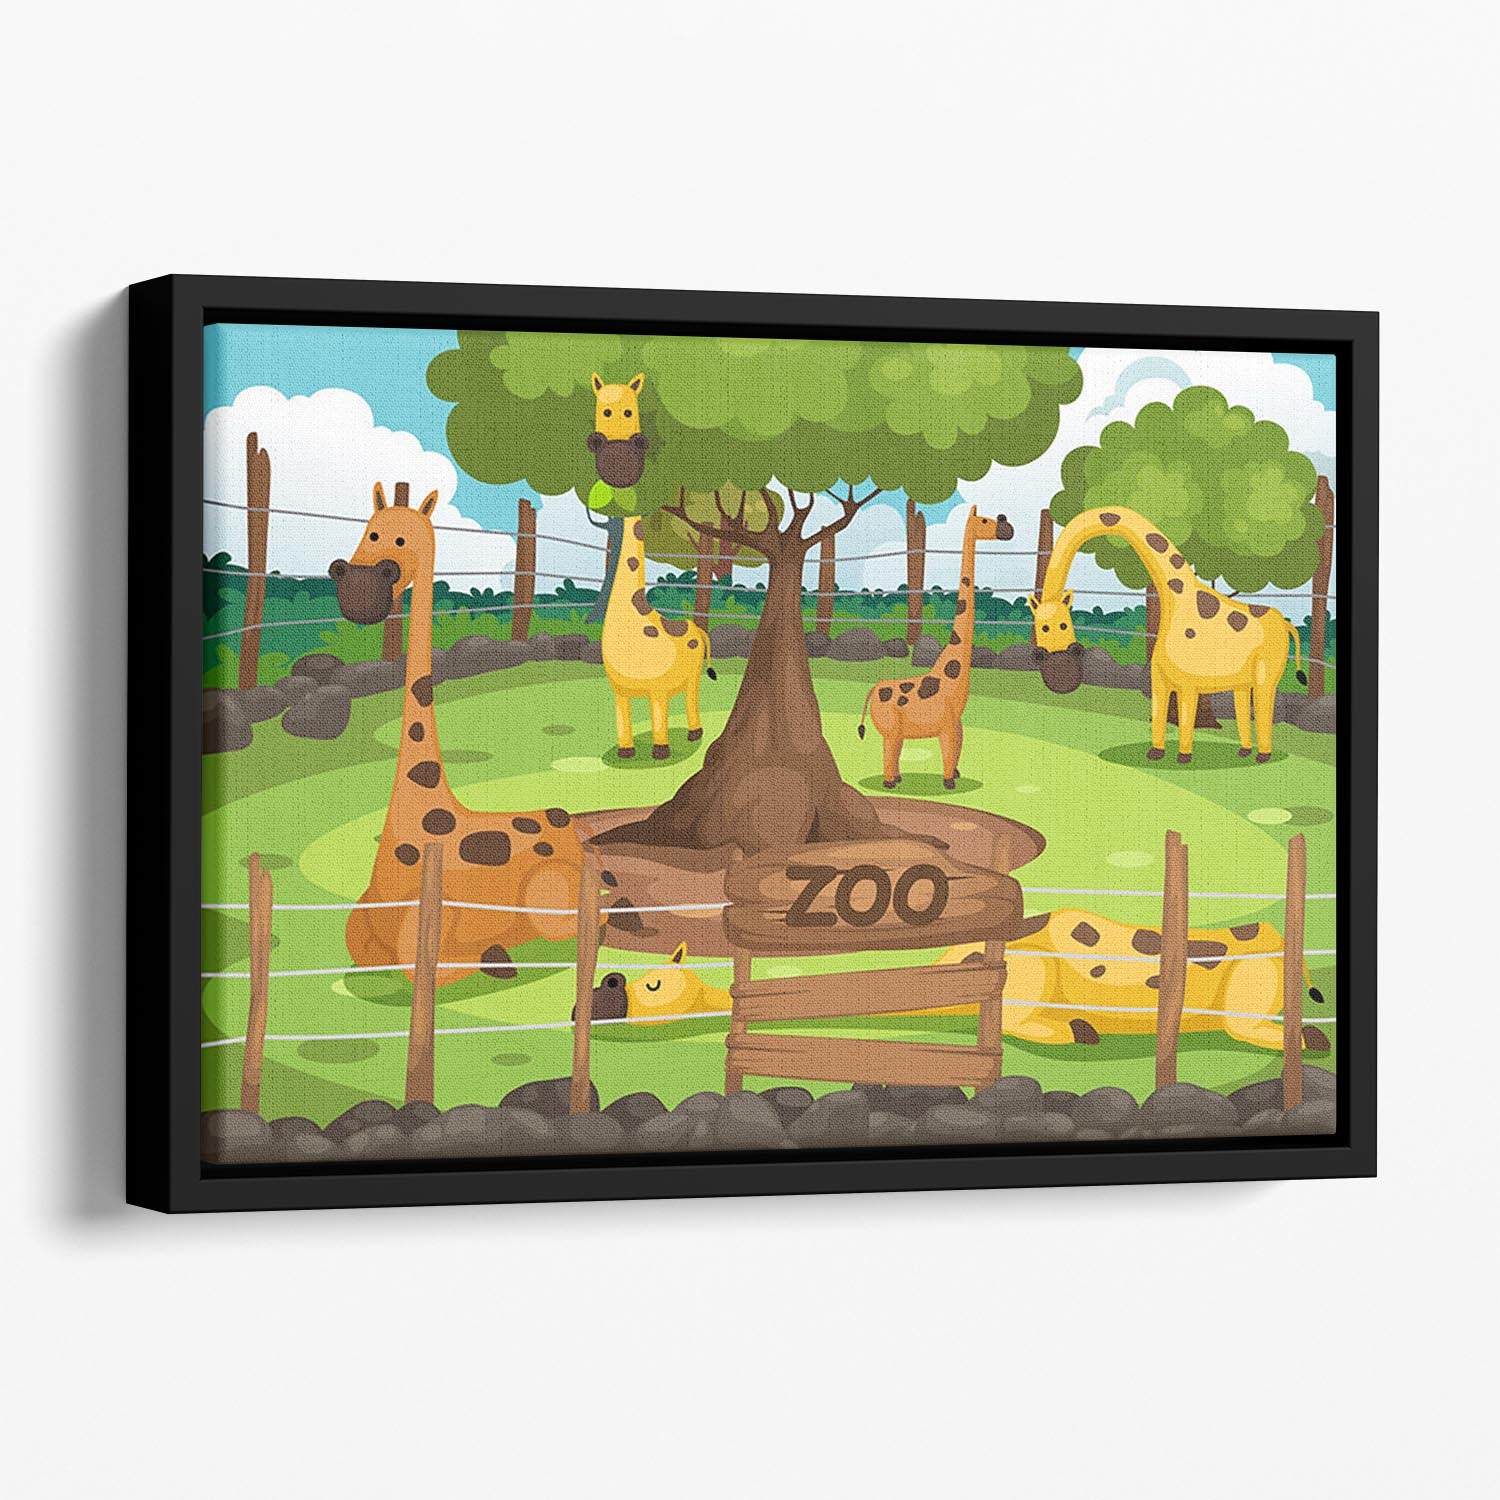 Illustration of a zoo and giraffe Floating Framed Canvas - Canvas Art Rocks - 1